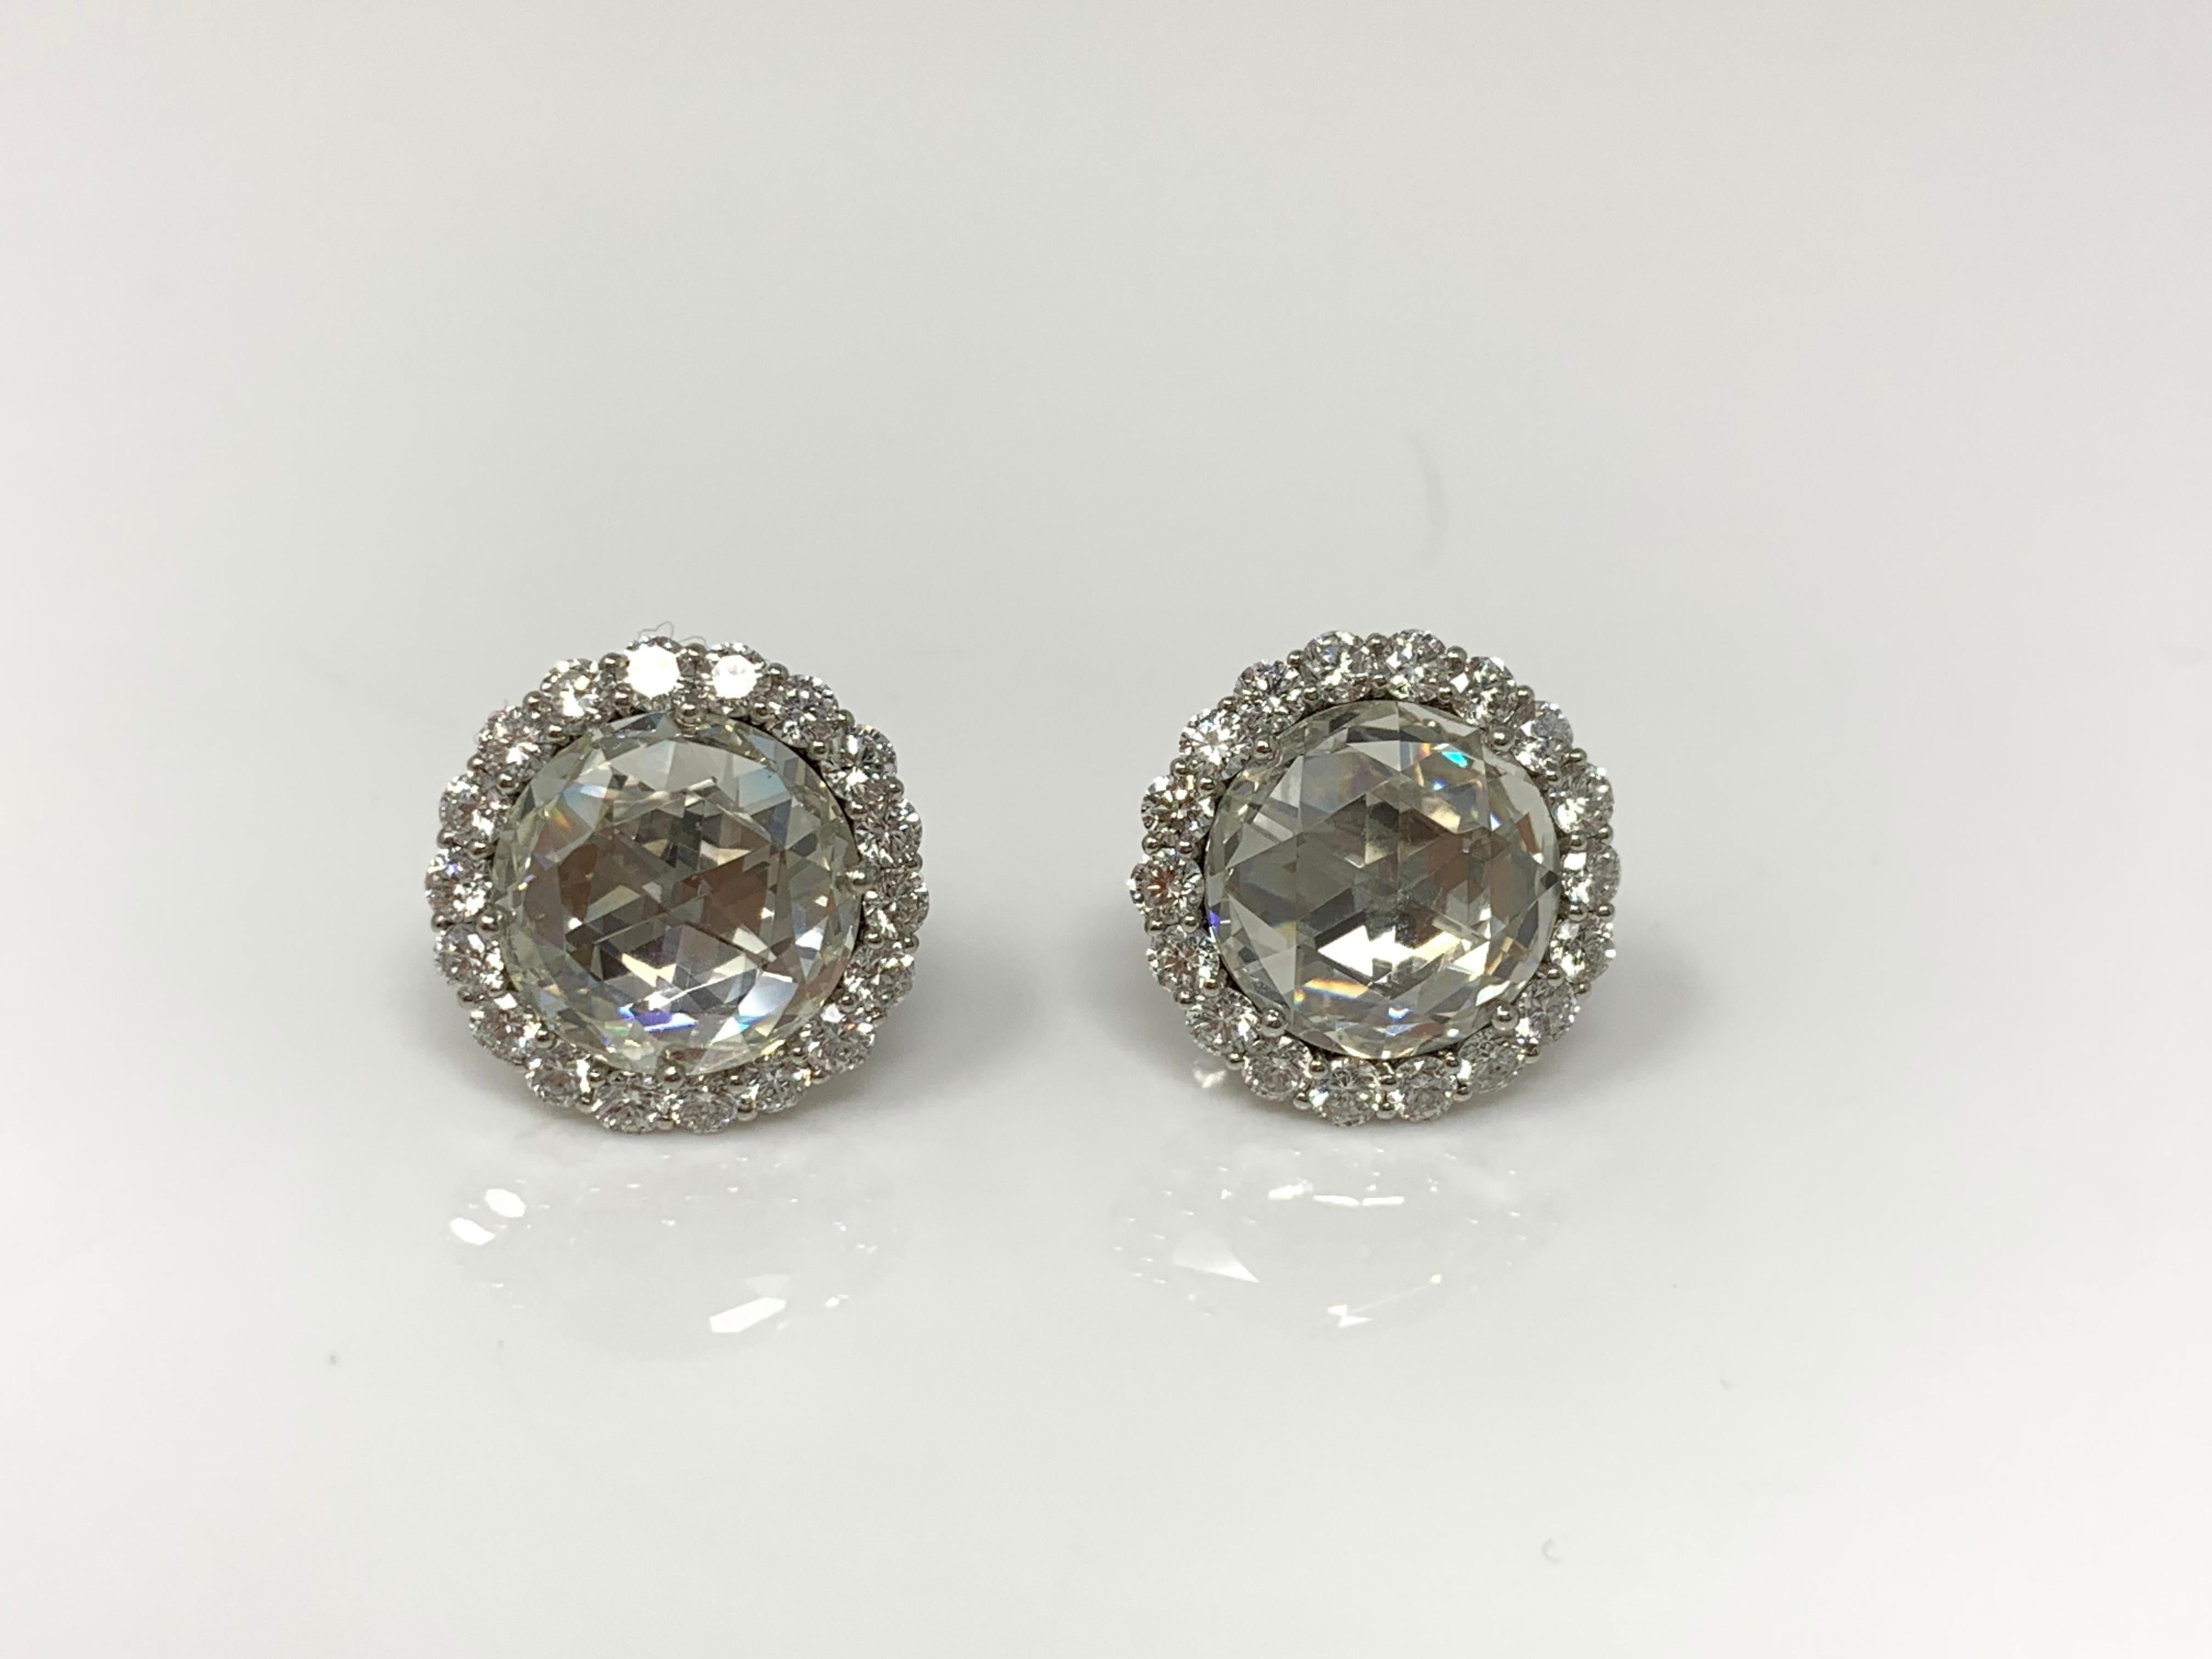 This gorgeous and classy pair of white rose cut diamond stud earrings showcase two white rose cut diamonds, 5.07 carat with K color and VS1 clarity and the other beautifully matched white rosecut diamond weighing 5 carat with K color and VVS2